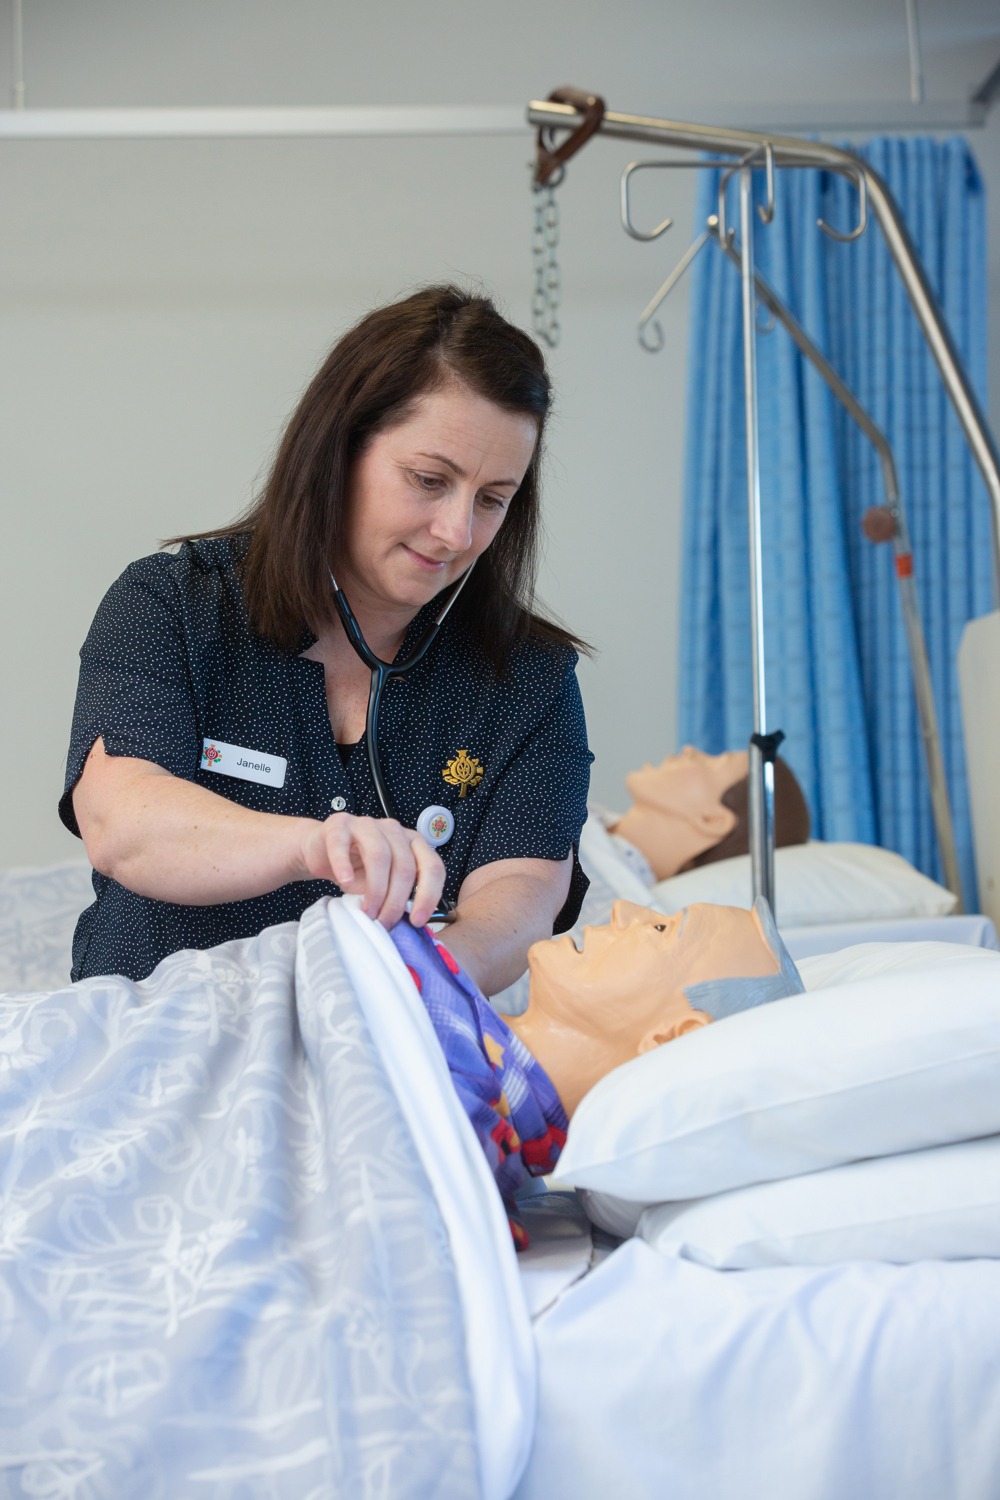 Janelle Darcy completed the Diploma of Nursing at South West TAFE and gained her dream job as a nurse.